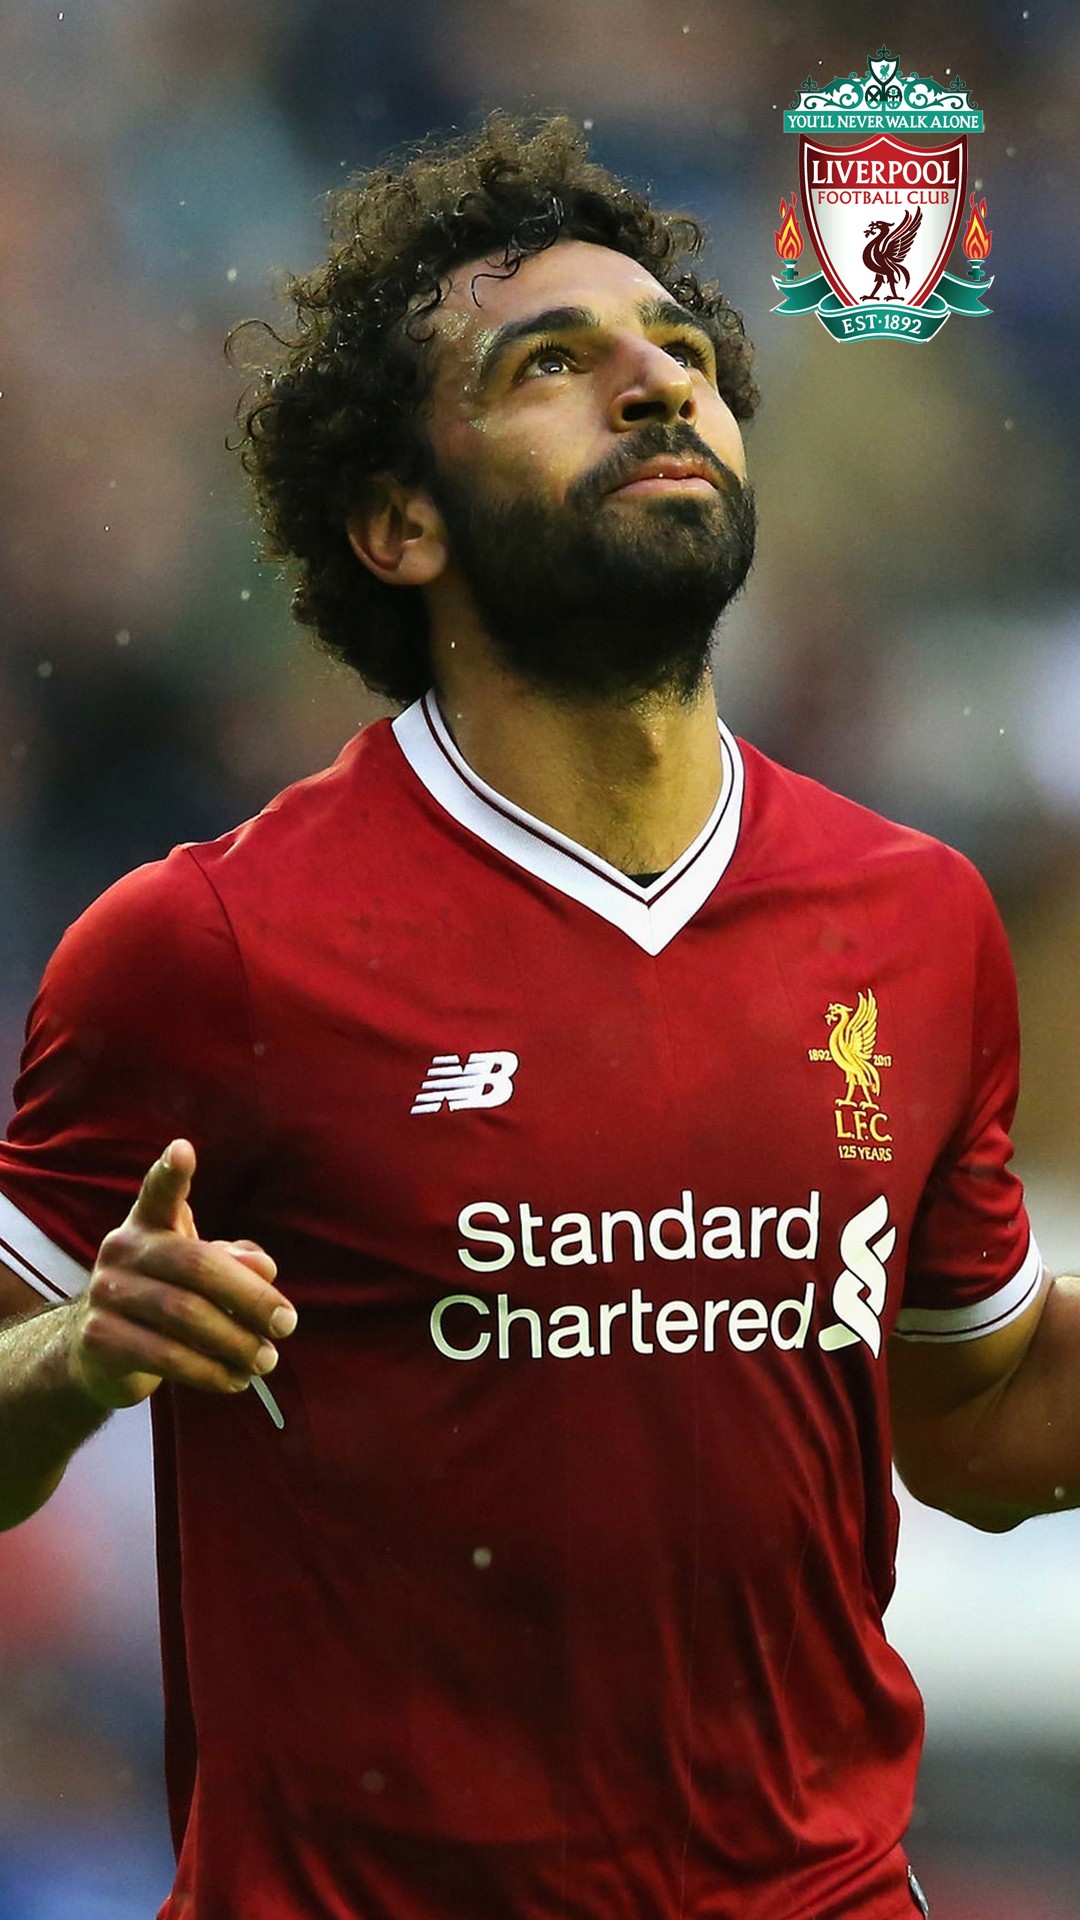 Android Wallpaper HD Mohamed Salah Pictures with image resolution 1080x1920 pixel. You can make this wallpaper for your Android backgrounds, Tablet, Smartphones Screensavers and Mobile Phone Lock Screen